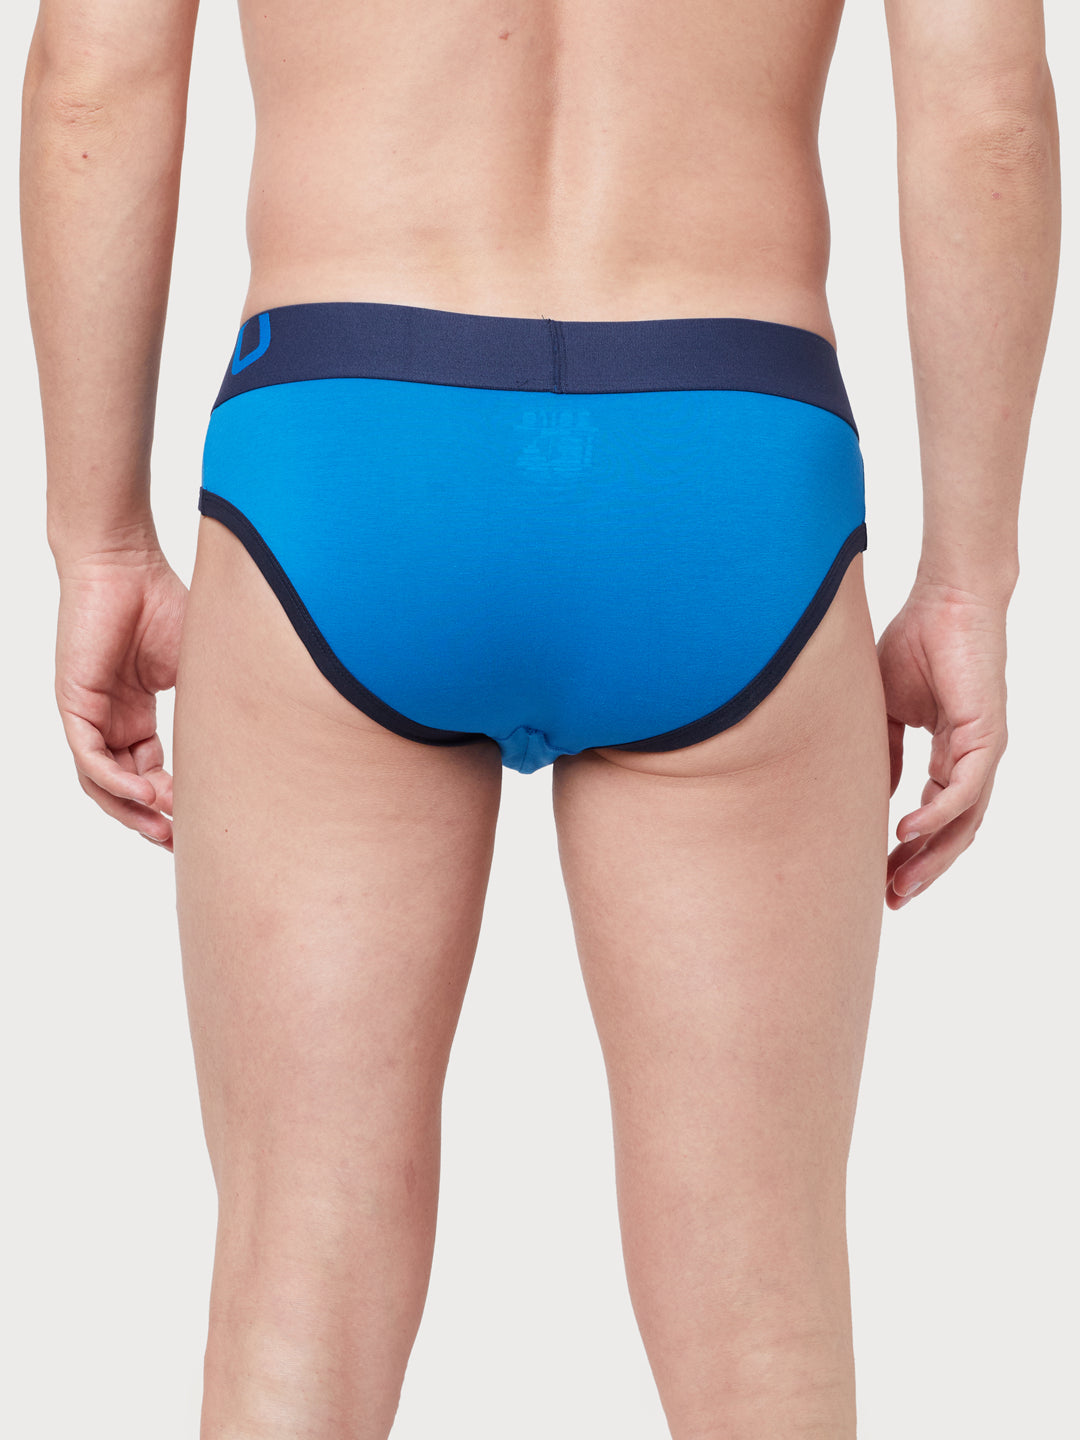 Zoiro Men&#39;s Combed Cotton Solid Brief (Pack 2)- Directory Blue + Nine Iron